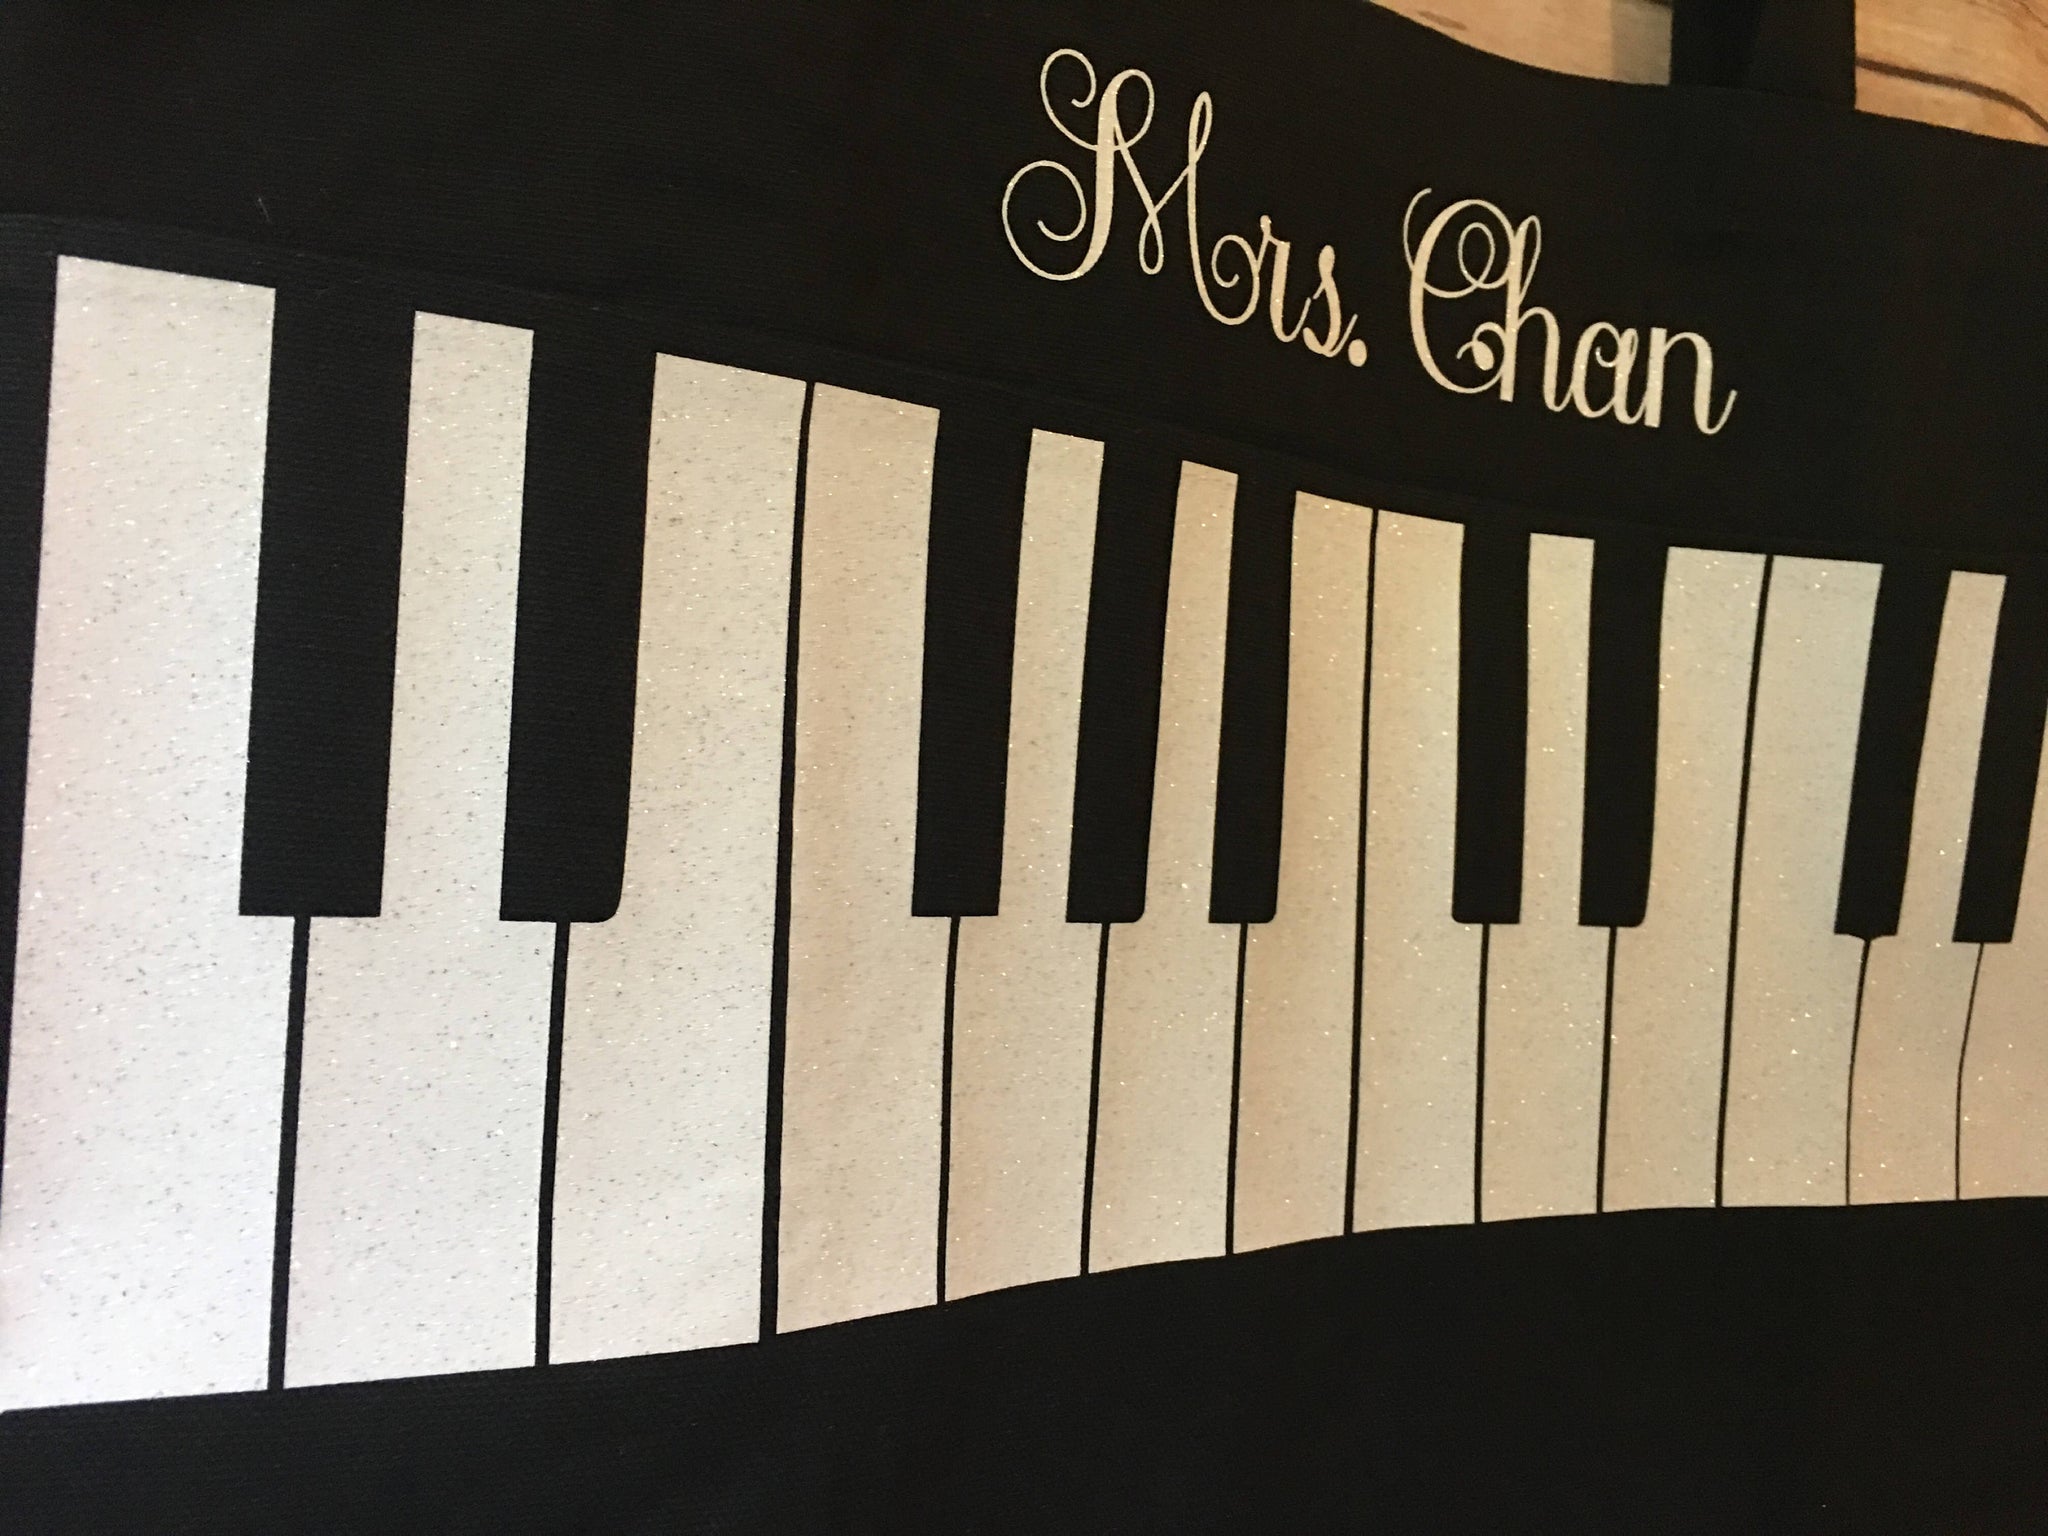 Personalized Piano Tote Bag – Made For You By Jenn